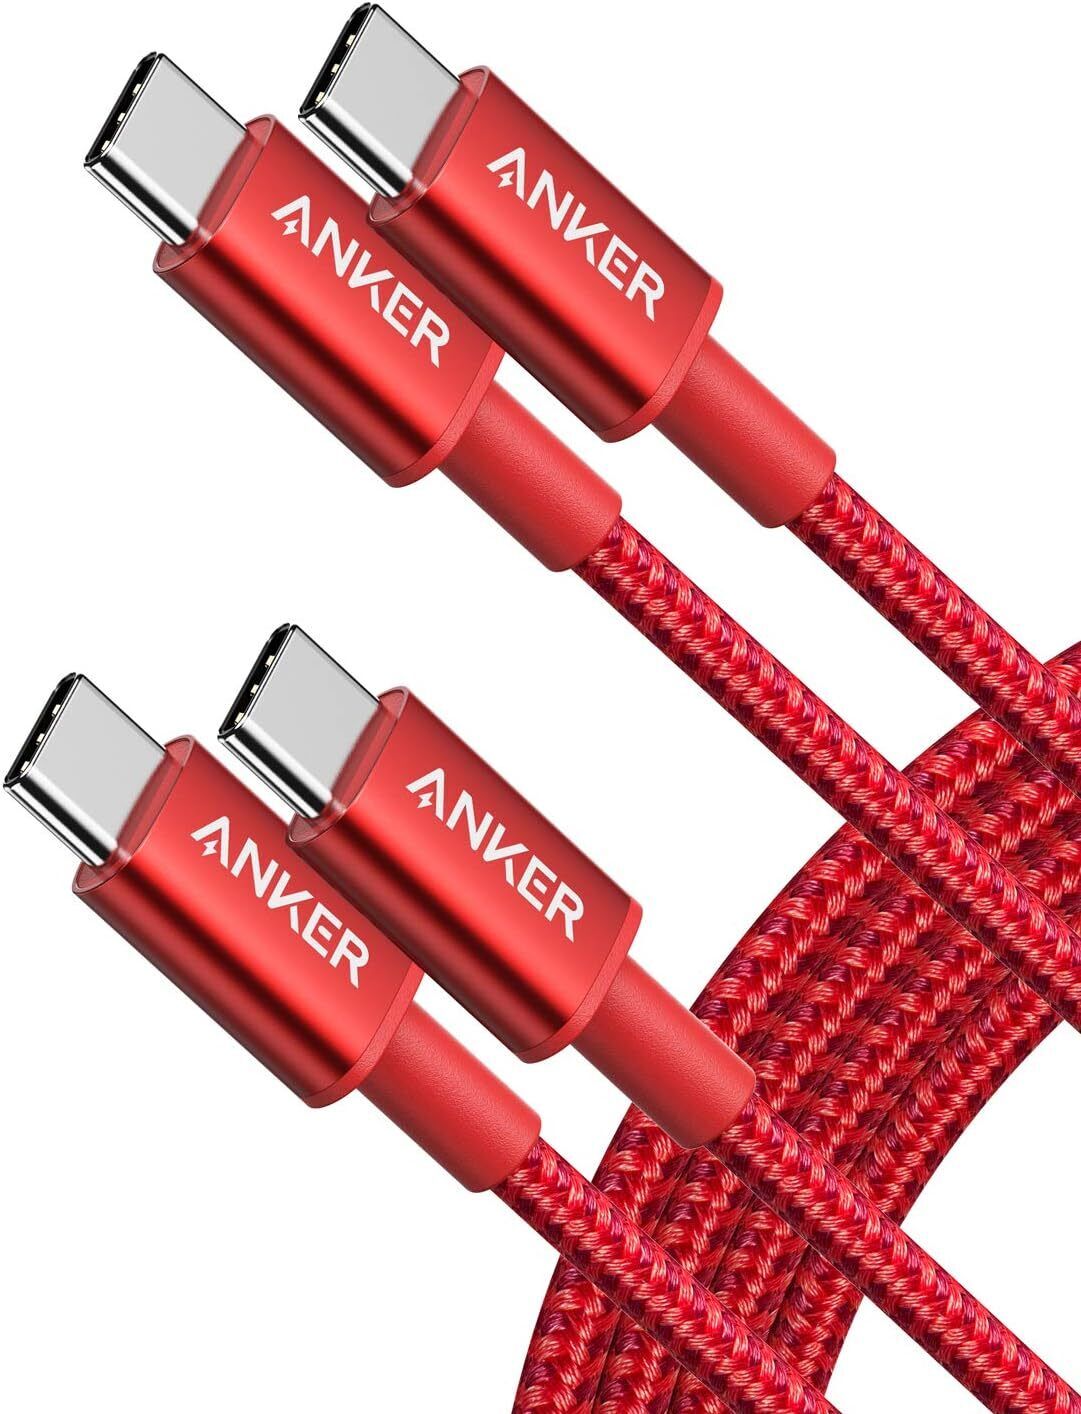 Anker USB C to C Cable, New Nylon C Charger Cable (6ft, 2Pack), Type... 